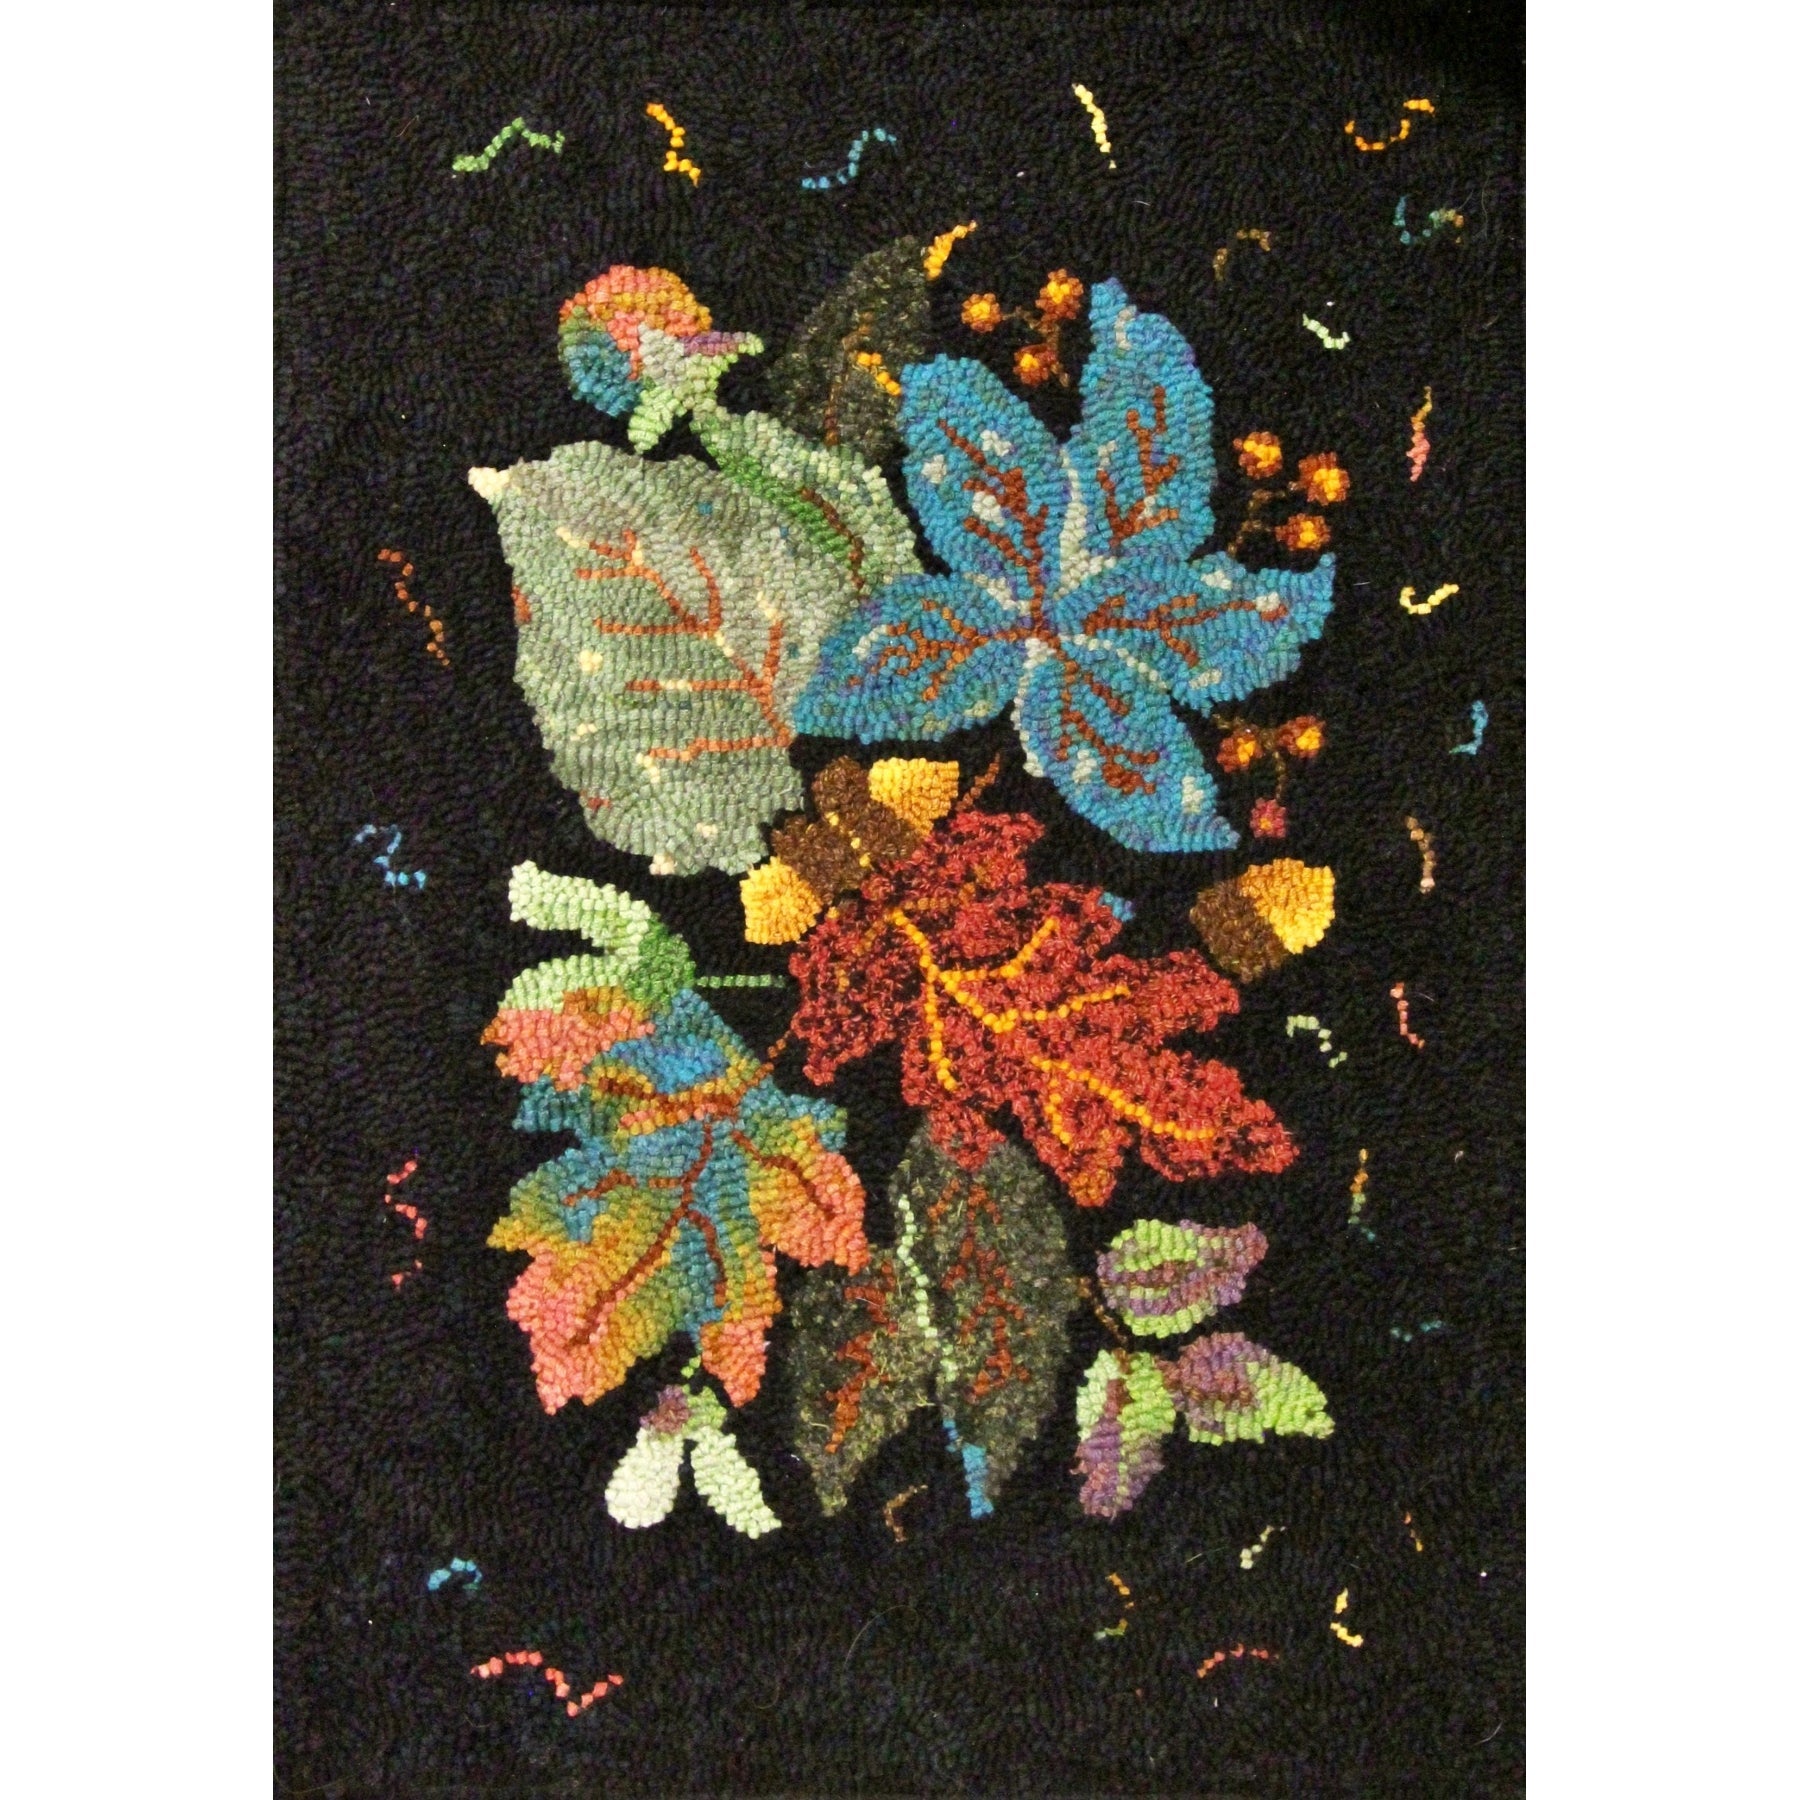 November, rug hooked by Janet Williams